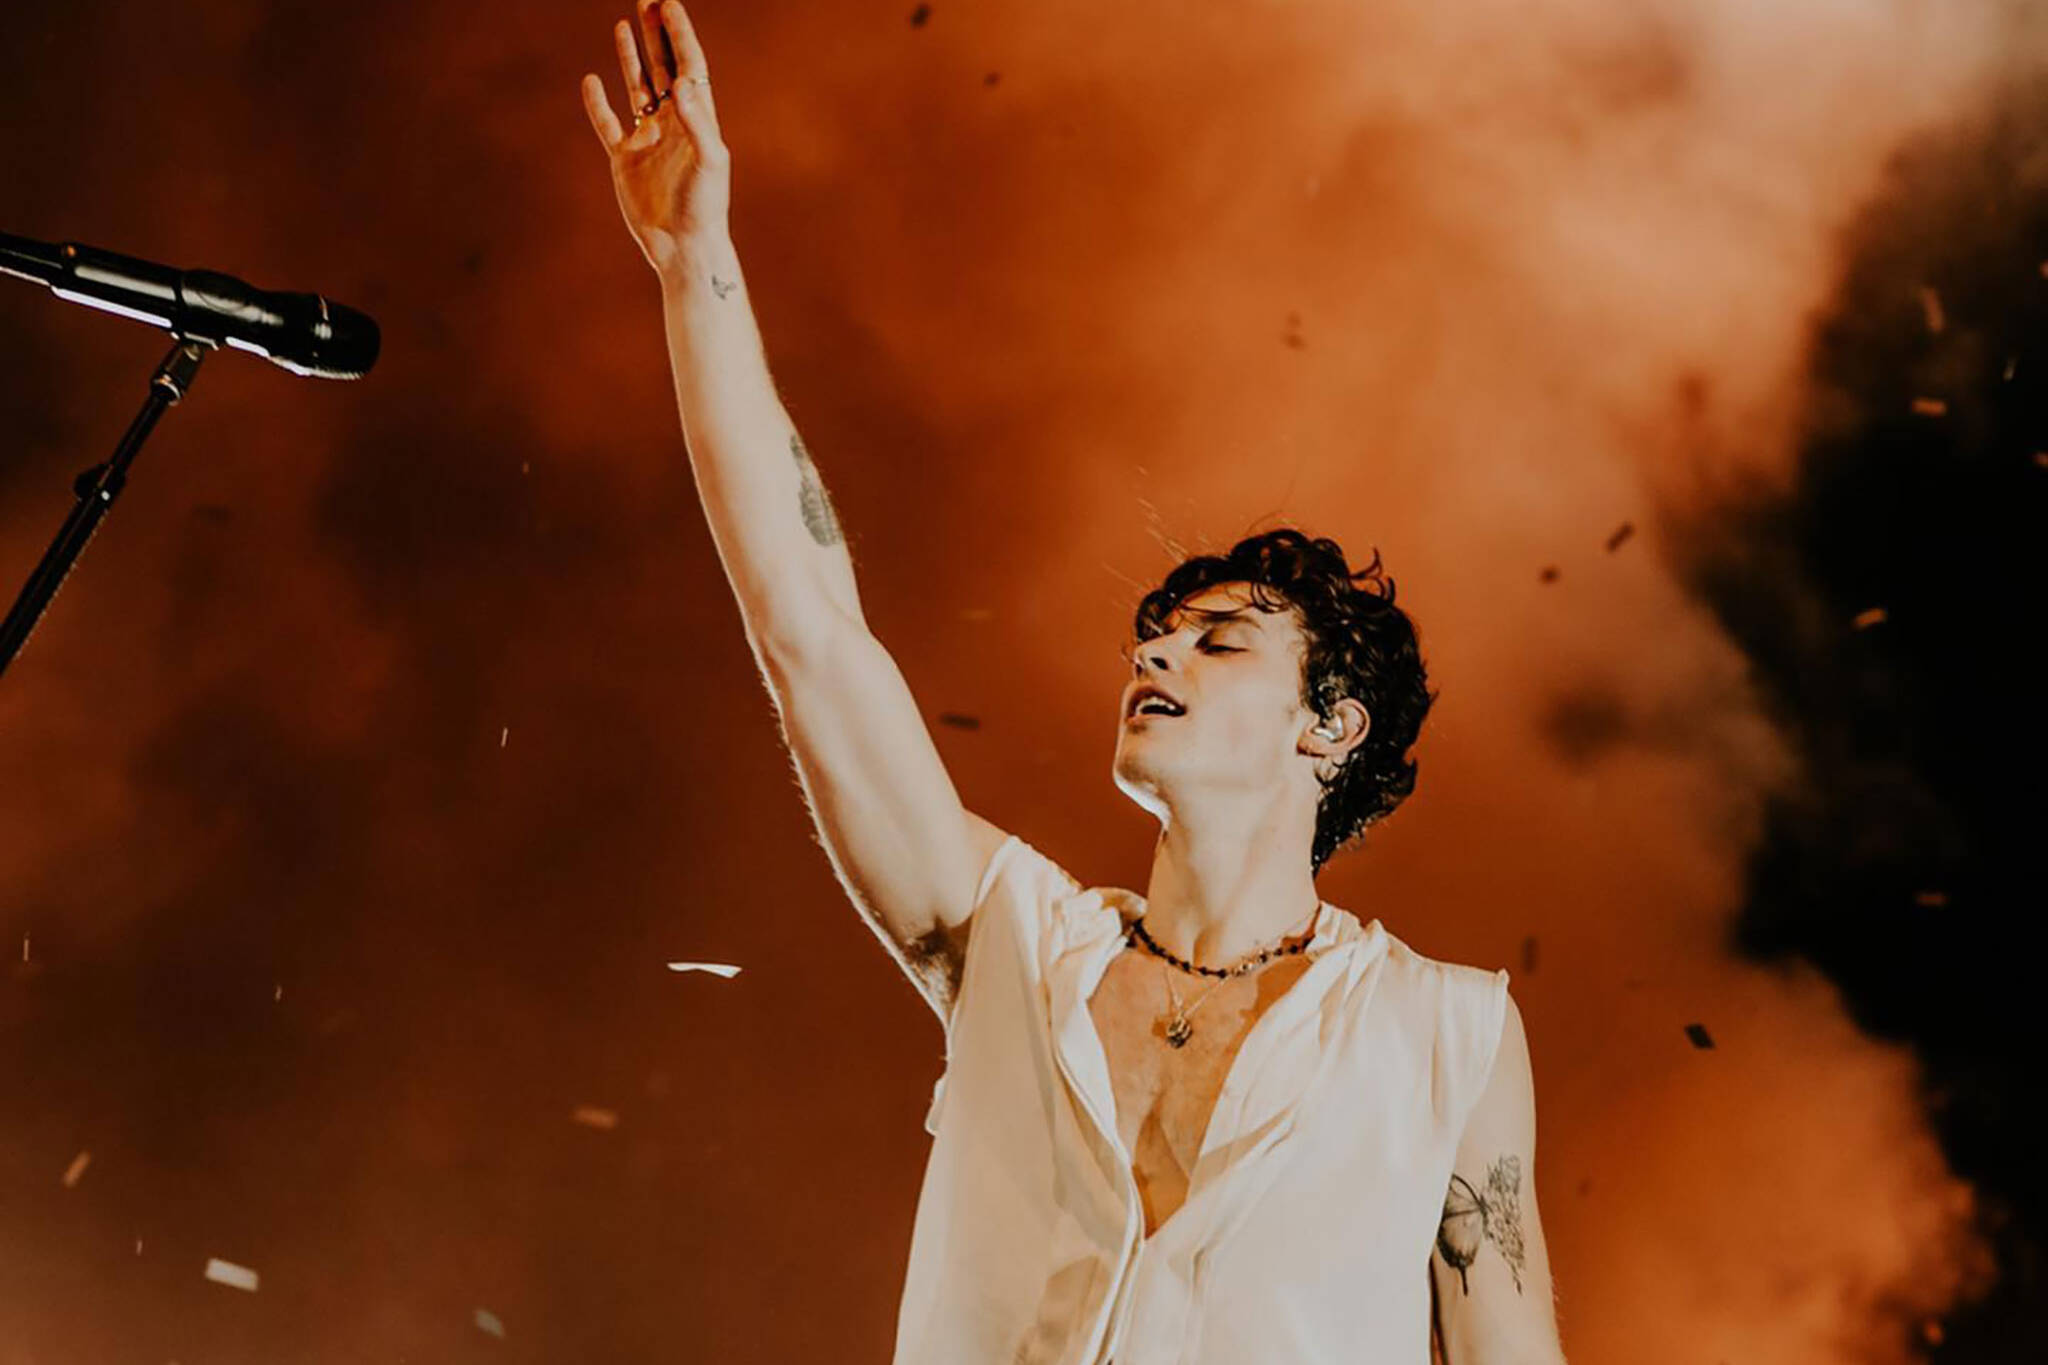 Shawn Mendes finally adds Toronto tour date after nearly skipping the